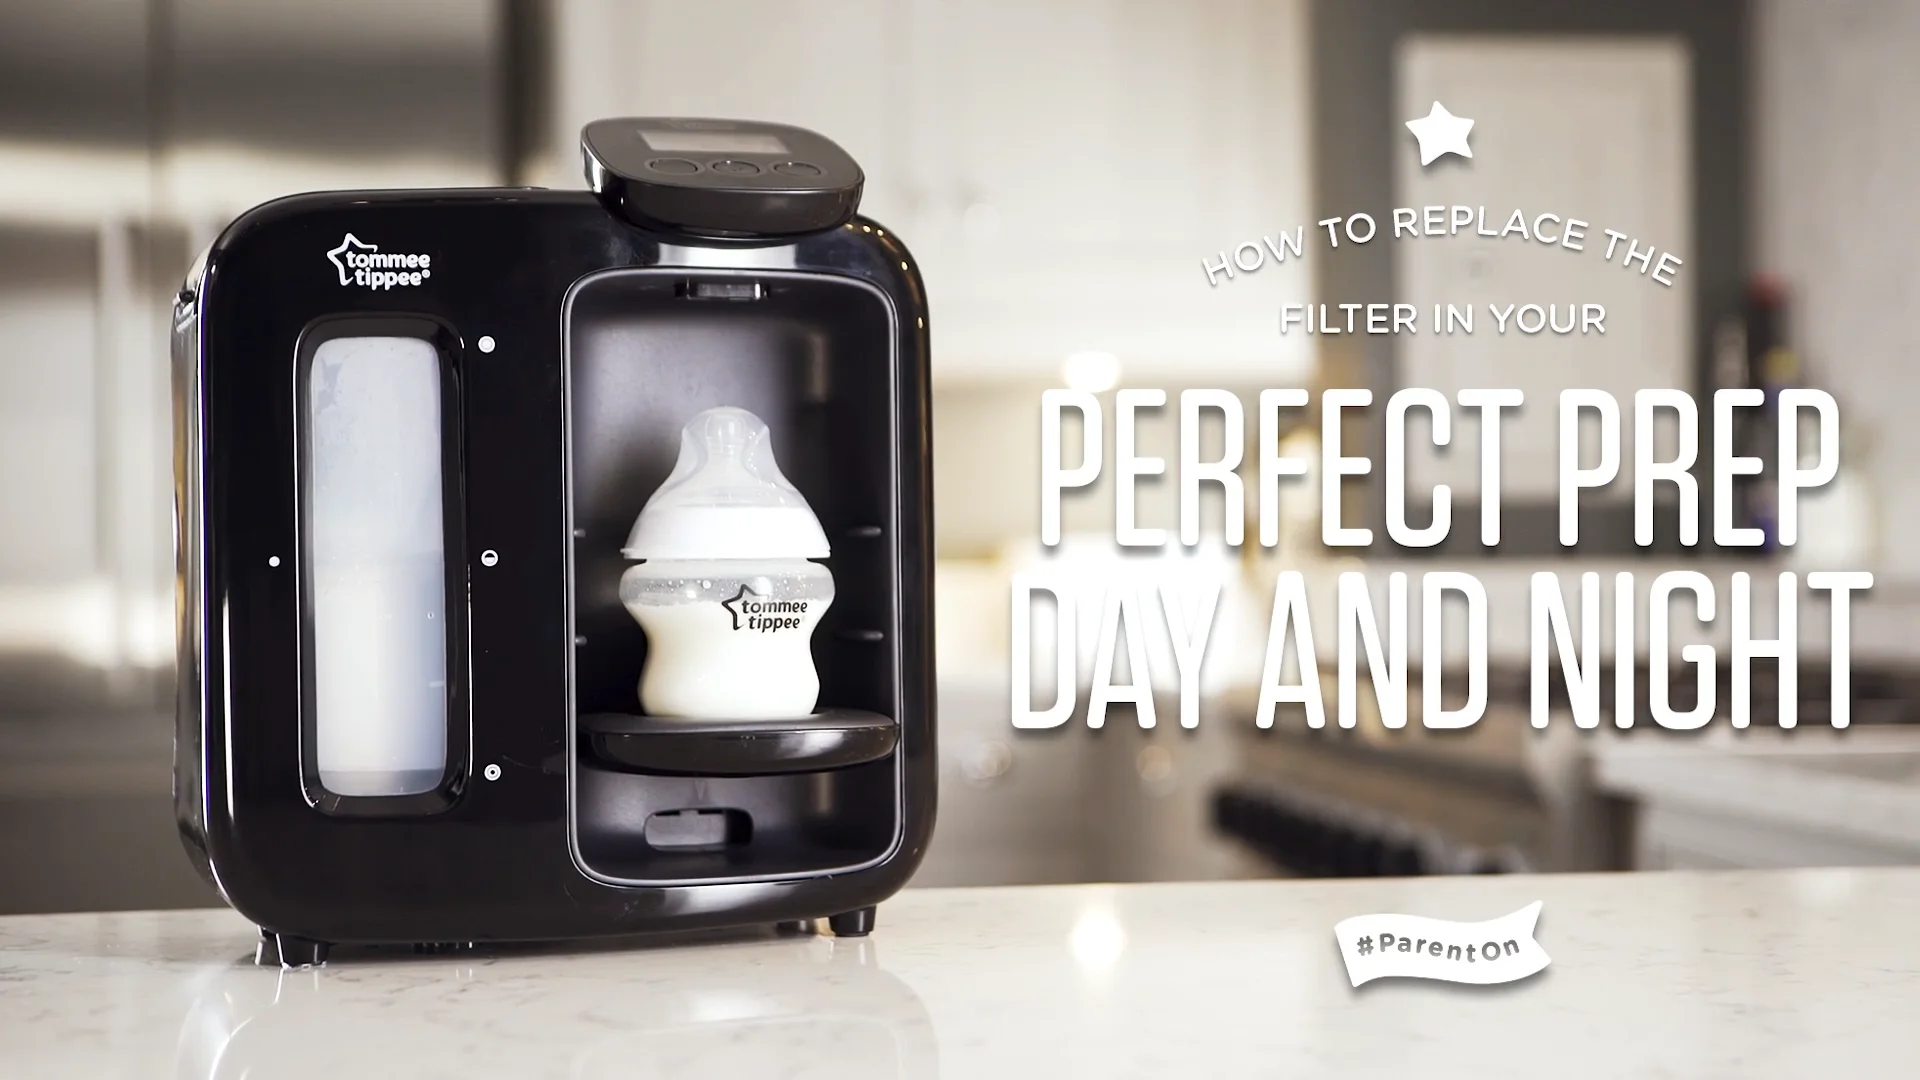 How to replace the filter in your Perfect Prep Day & Night on Vimeo